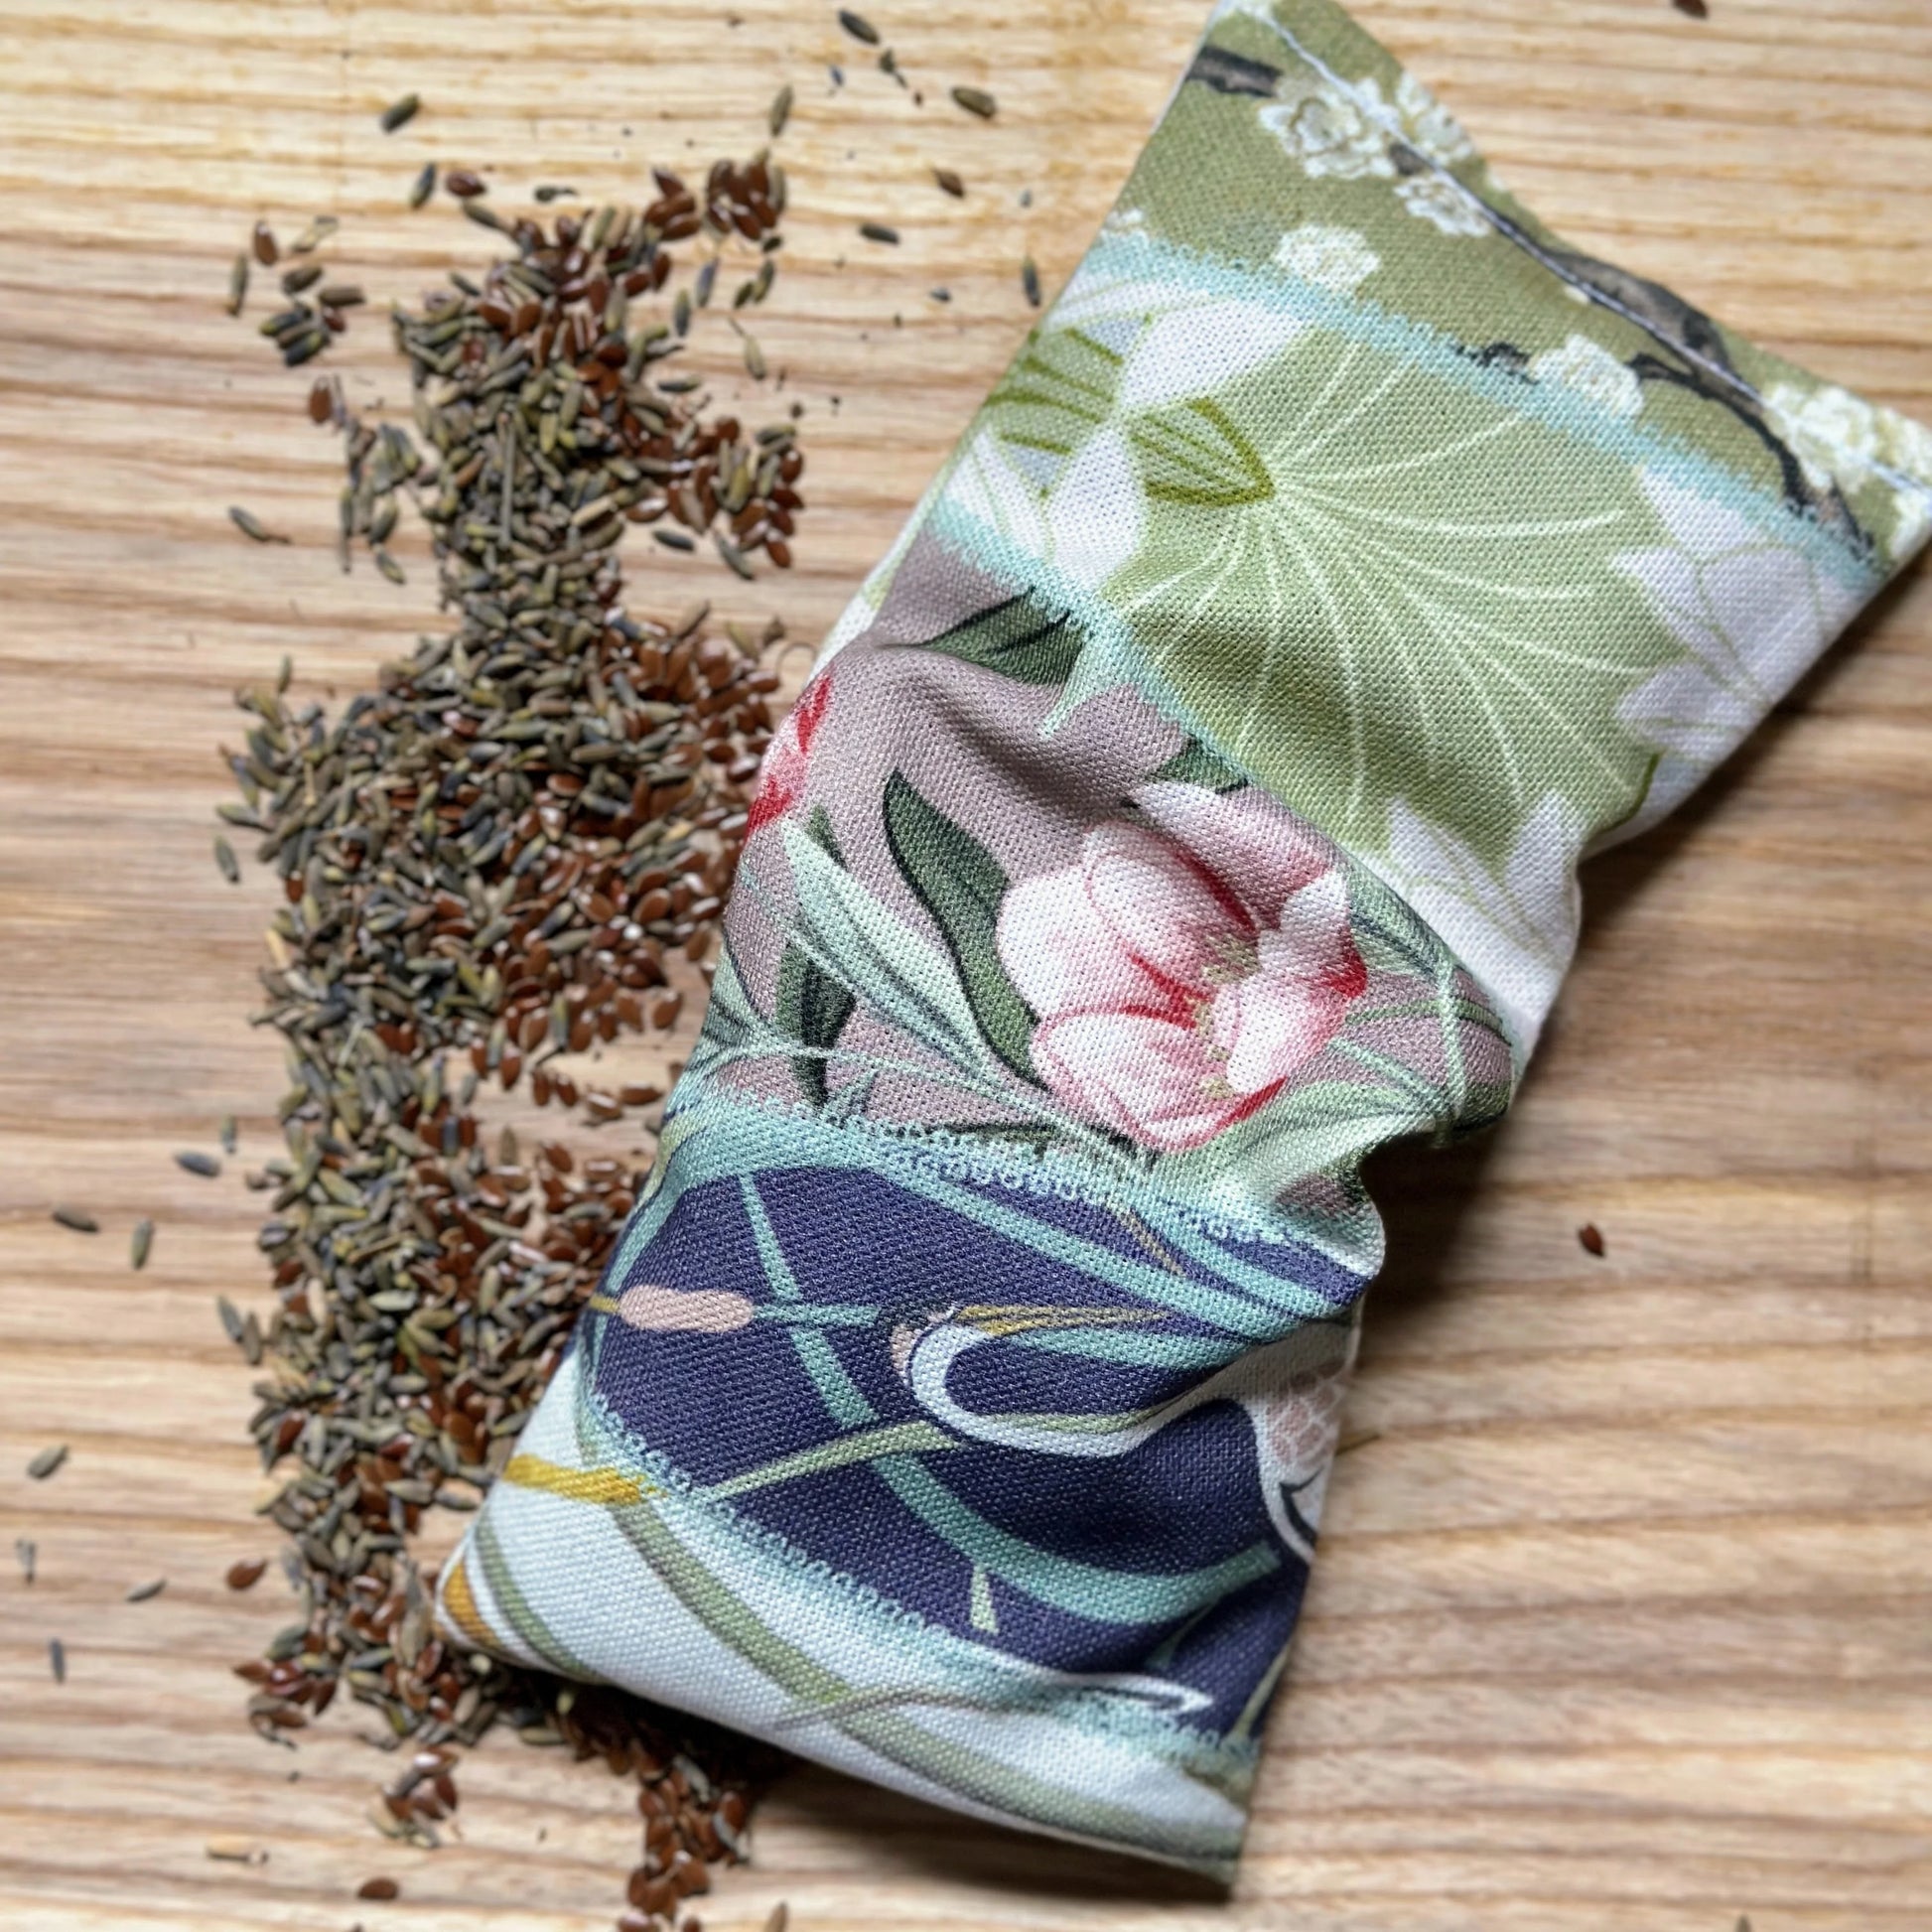 chateau patchwork floral print with flaxseed and lavender. practical wellbeing gift with free shipping 